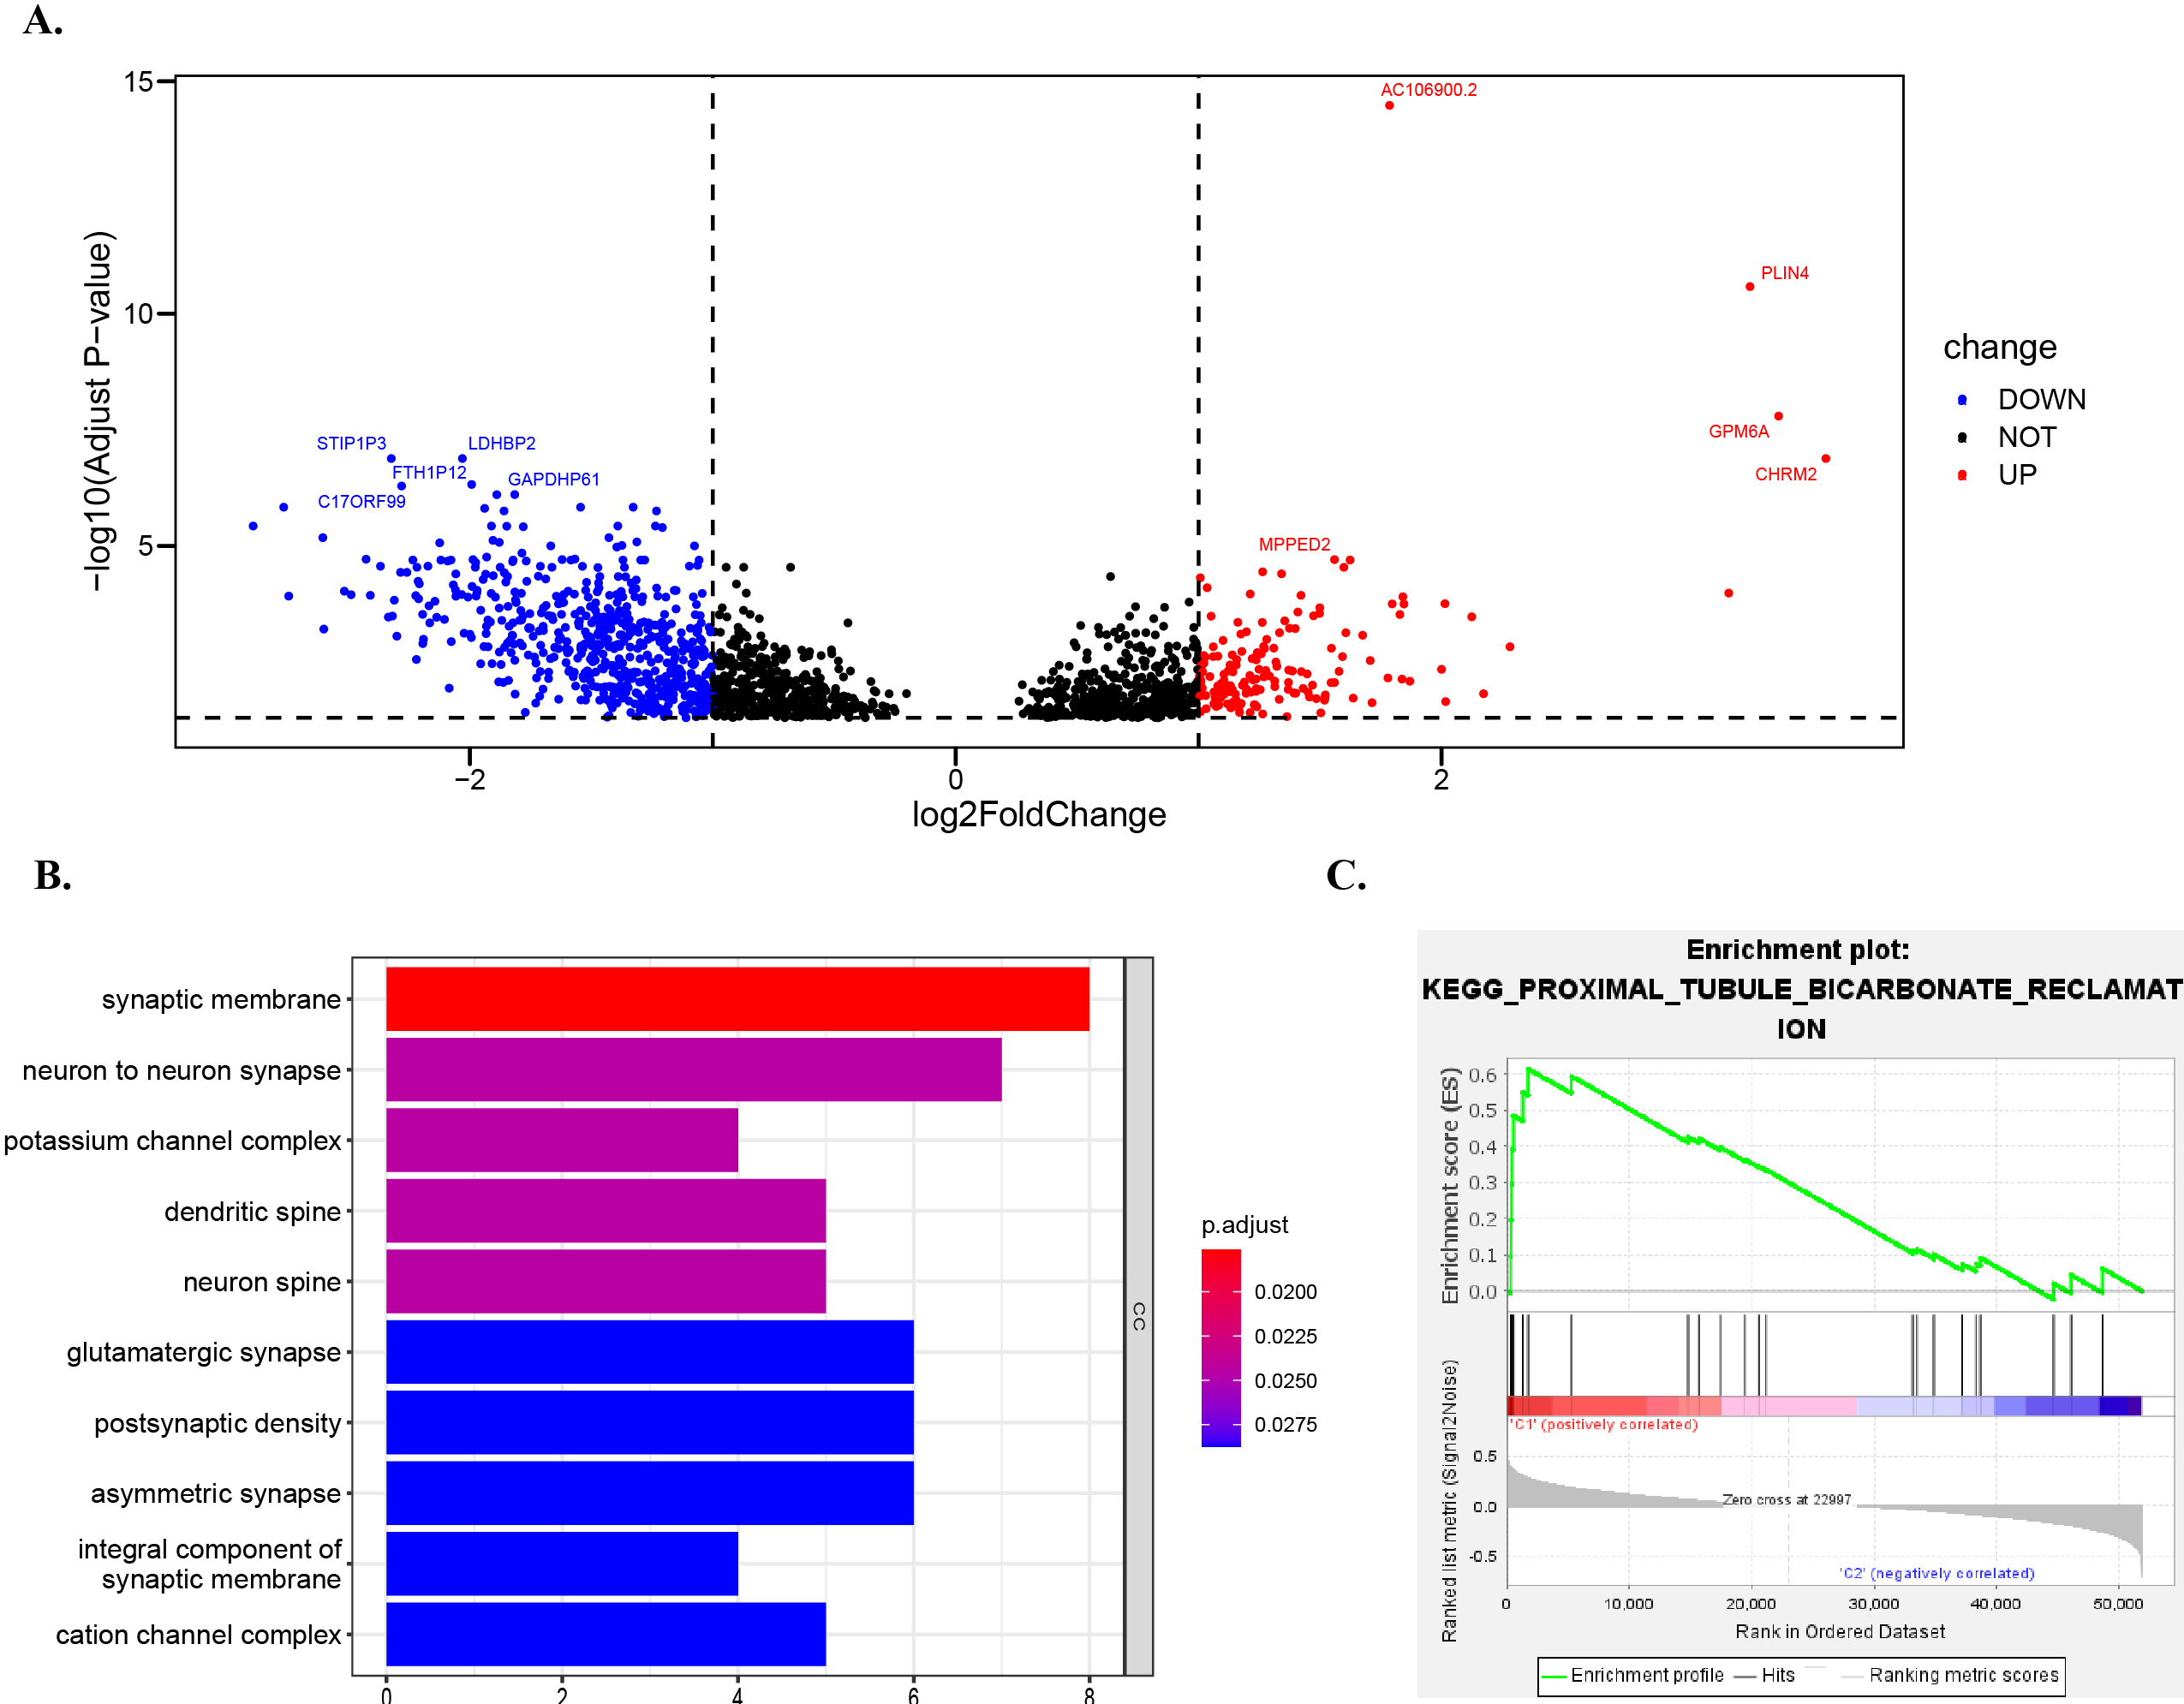 Go and GSEA enrichment analysis of DEG between high-risk and low-risk groups. Volcano plot shows the differentially expressed mRNAs (DE-mRNAs) between high-risk and low-risk groups. Gene ontology enrichment analysis of differentially expressed genes in high-risk and low-risk groups. (C) The GSEA gene accumulation results showed that the high subpopulations were enriched in the Proximal_tubule_bicarbonate_reclamation pathway. This study shows that the |NES|> 1, p-value < 0.05, FDR < 0.25, indicating significant enrichment in this pathway.